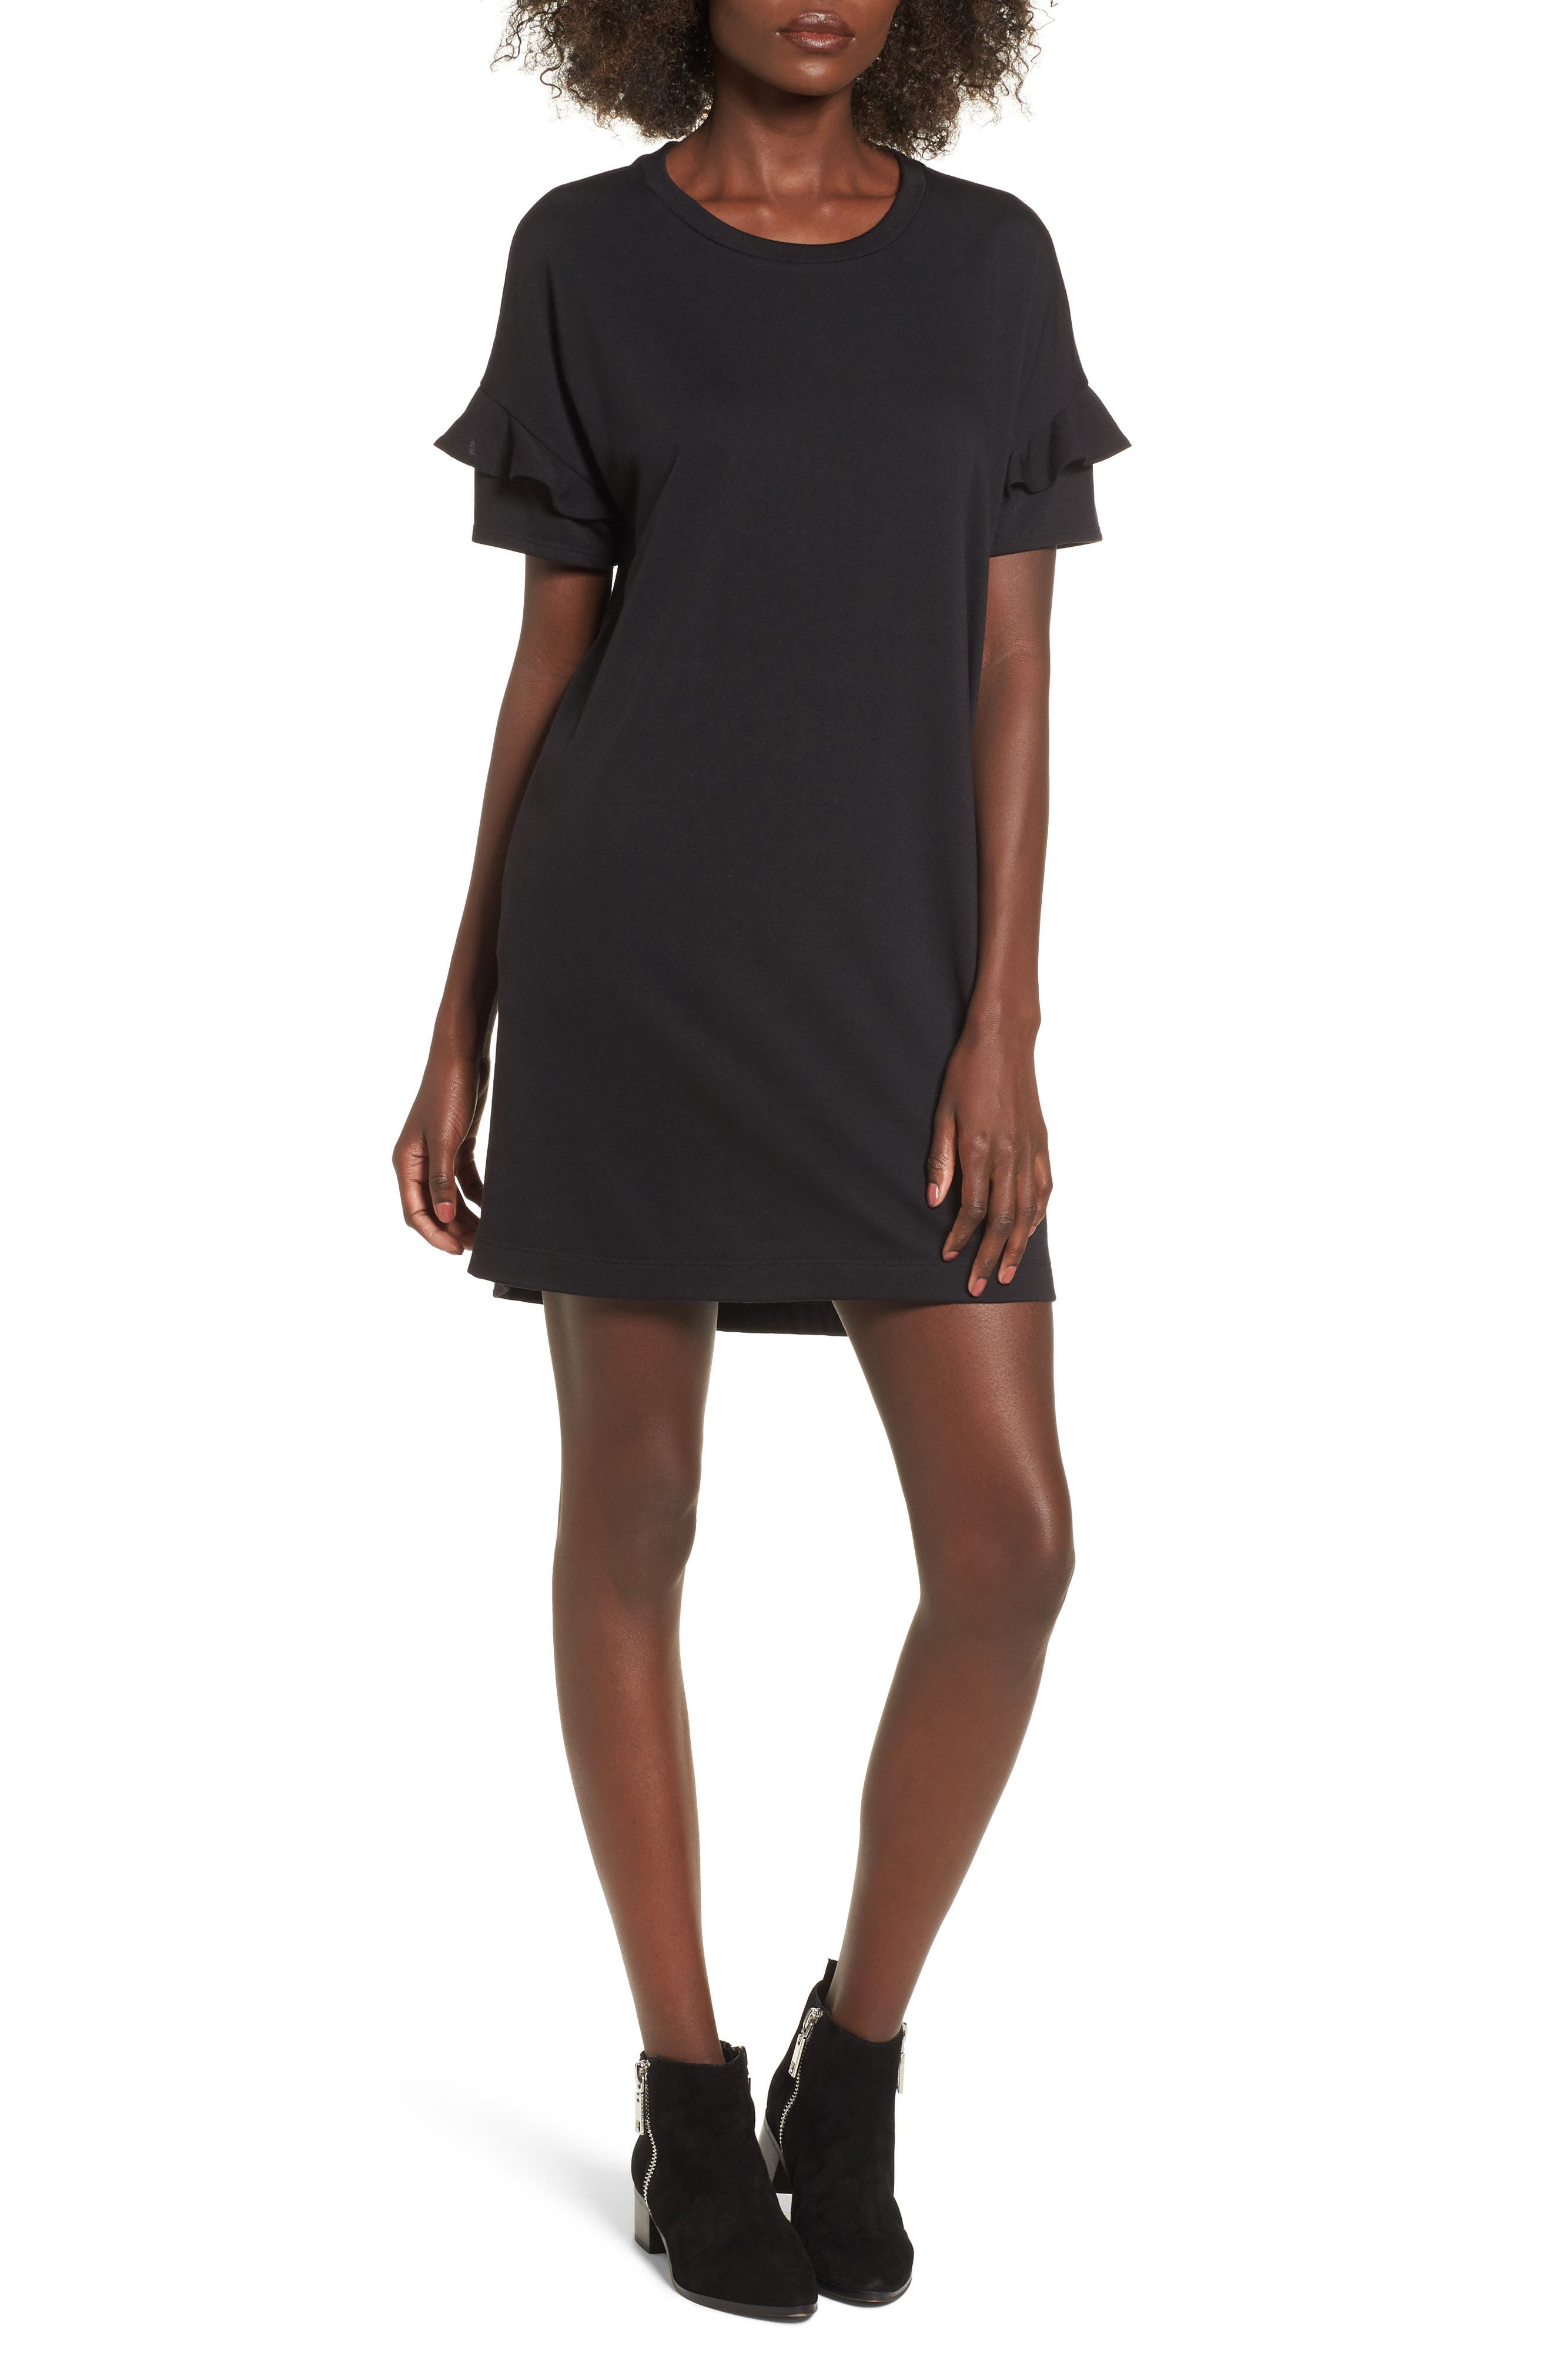 t shirt dress with frill sleeves